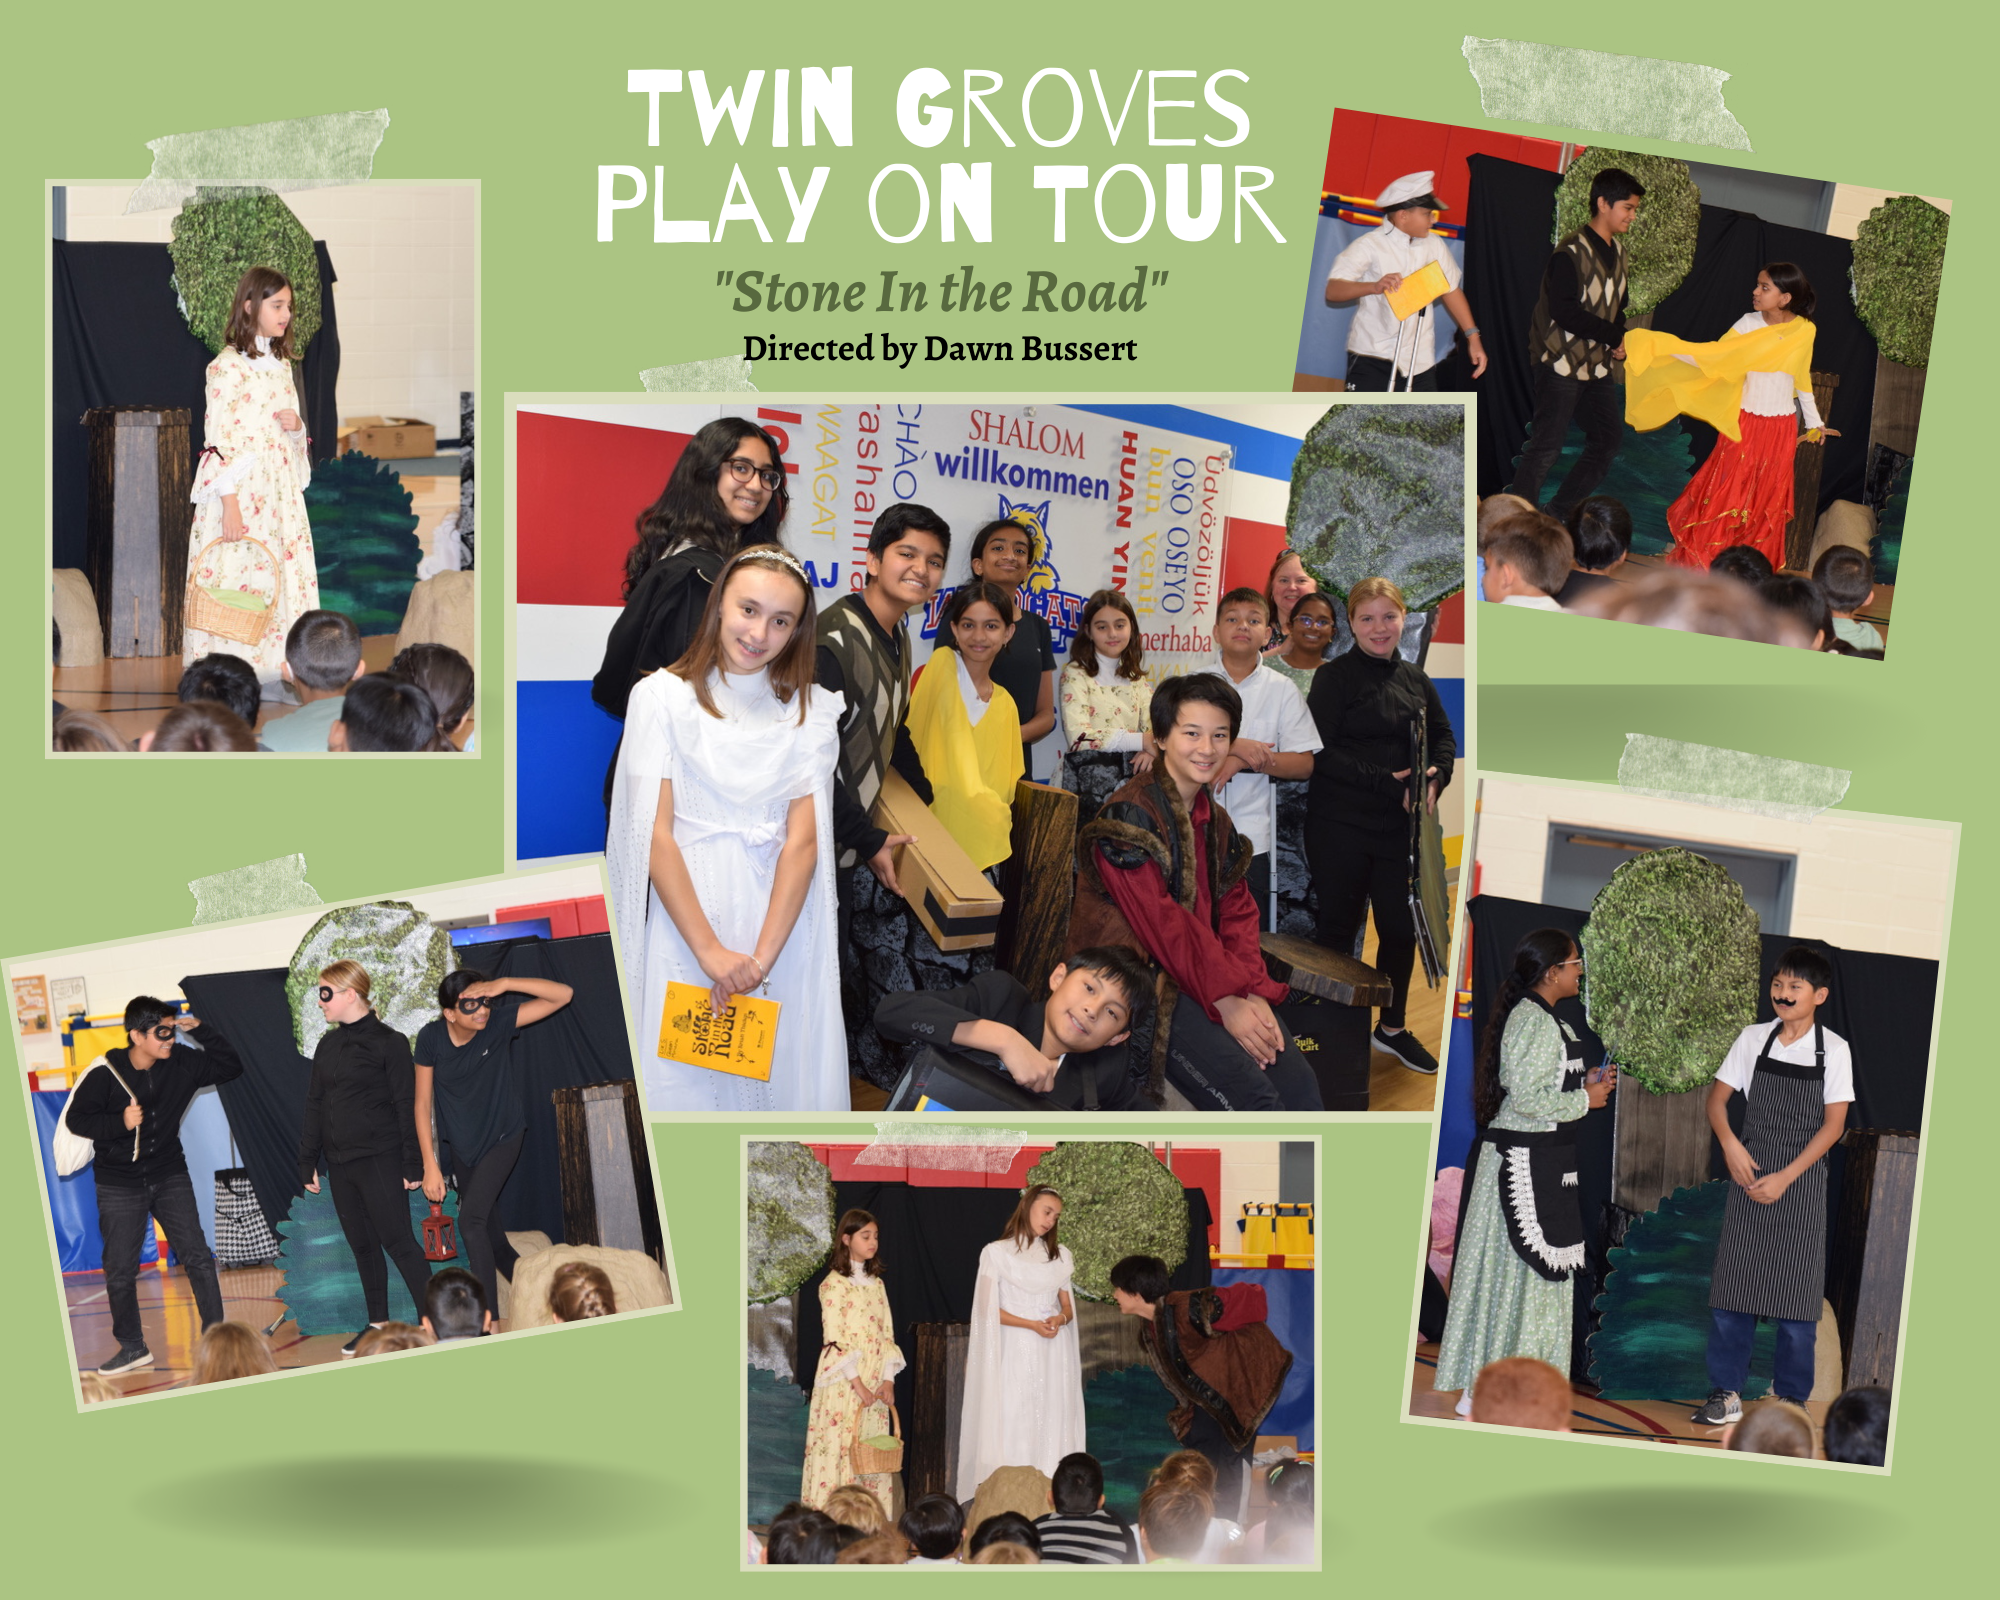 Twin Groves' Play cast tours